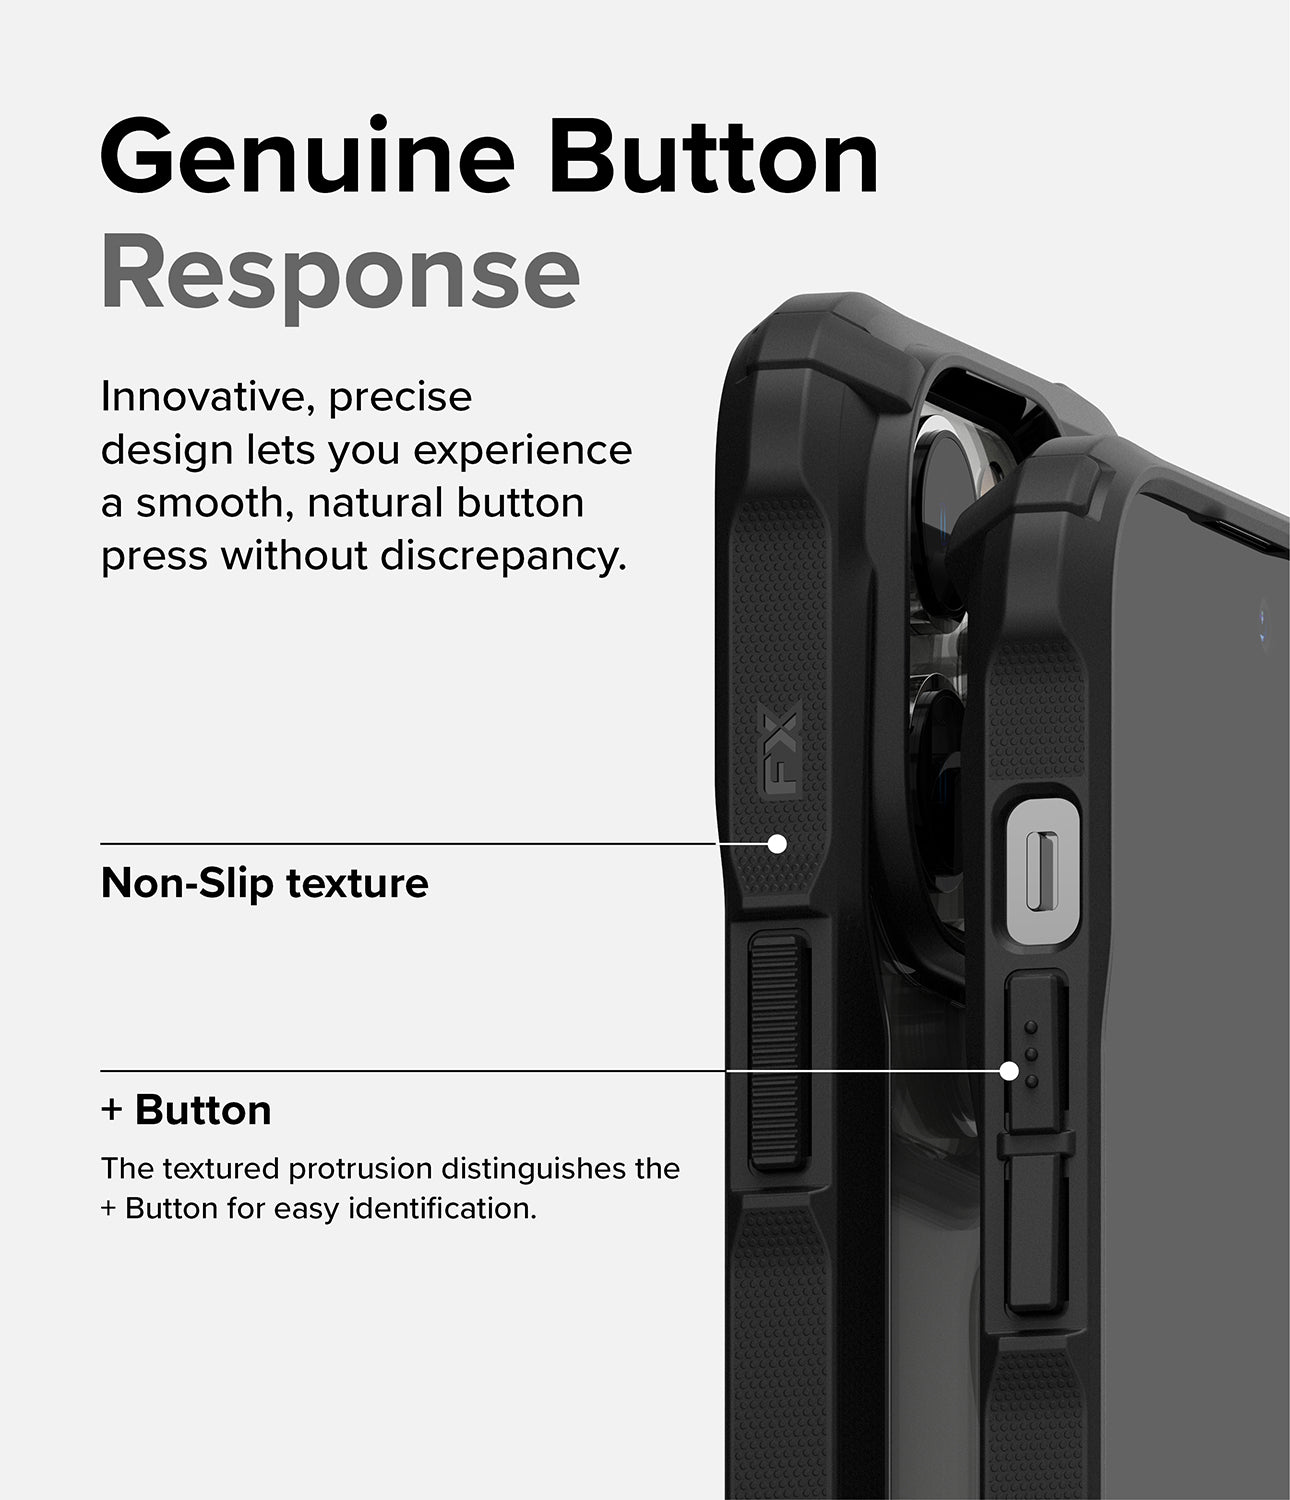 iPhone 14 Pro Max Case | Fusion-X - Black - Genuine Button Response. Innovative, precise design lets you experience a smooth, natural button press without discrepancy. Non-Slip texture. + Button. The textured protrusion distinguishes the + Button for easy identification.